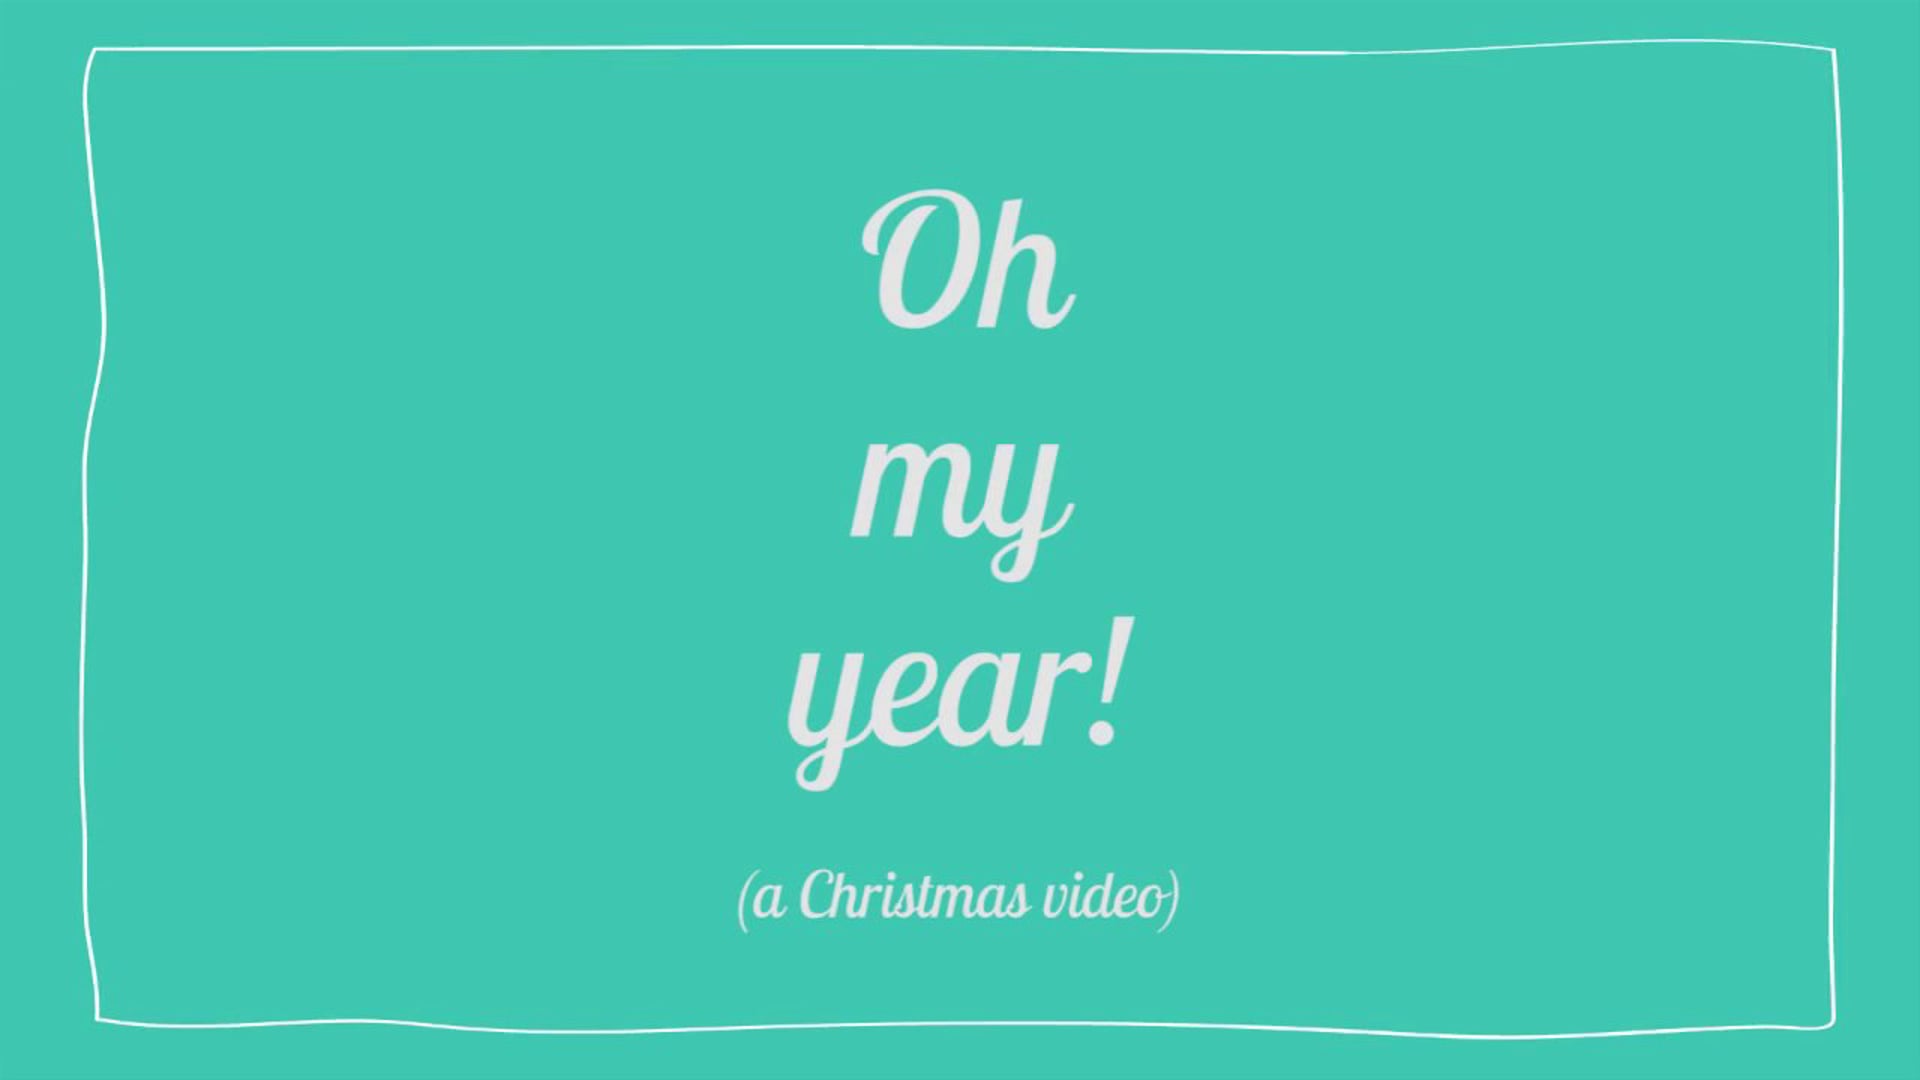 4 - Oh my year! (A Christmas video)